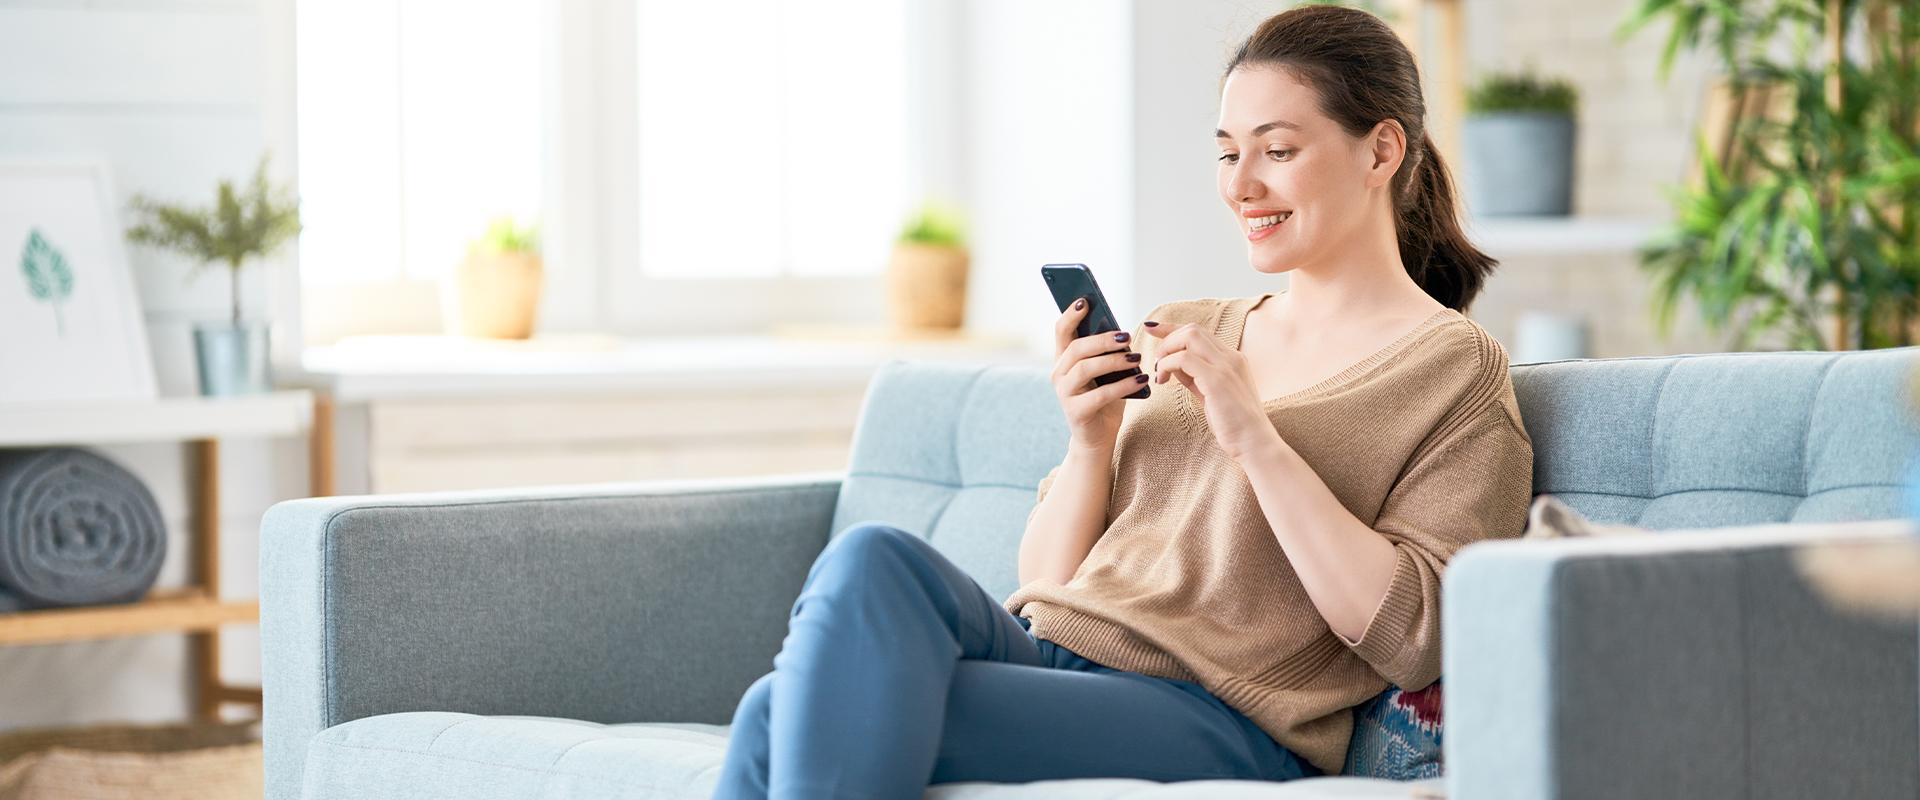 smiling woman on her phone at home